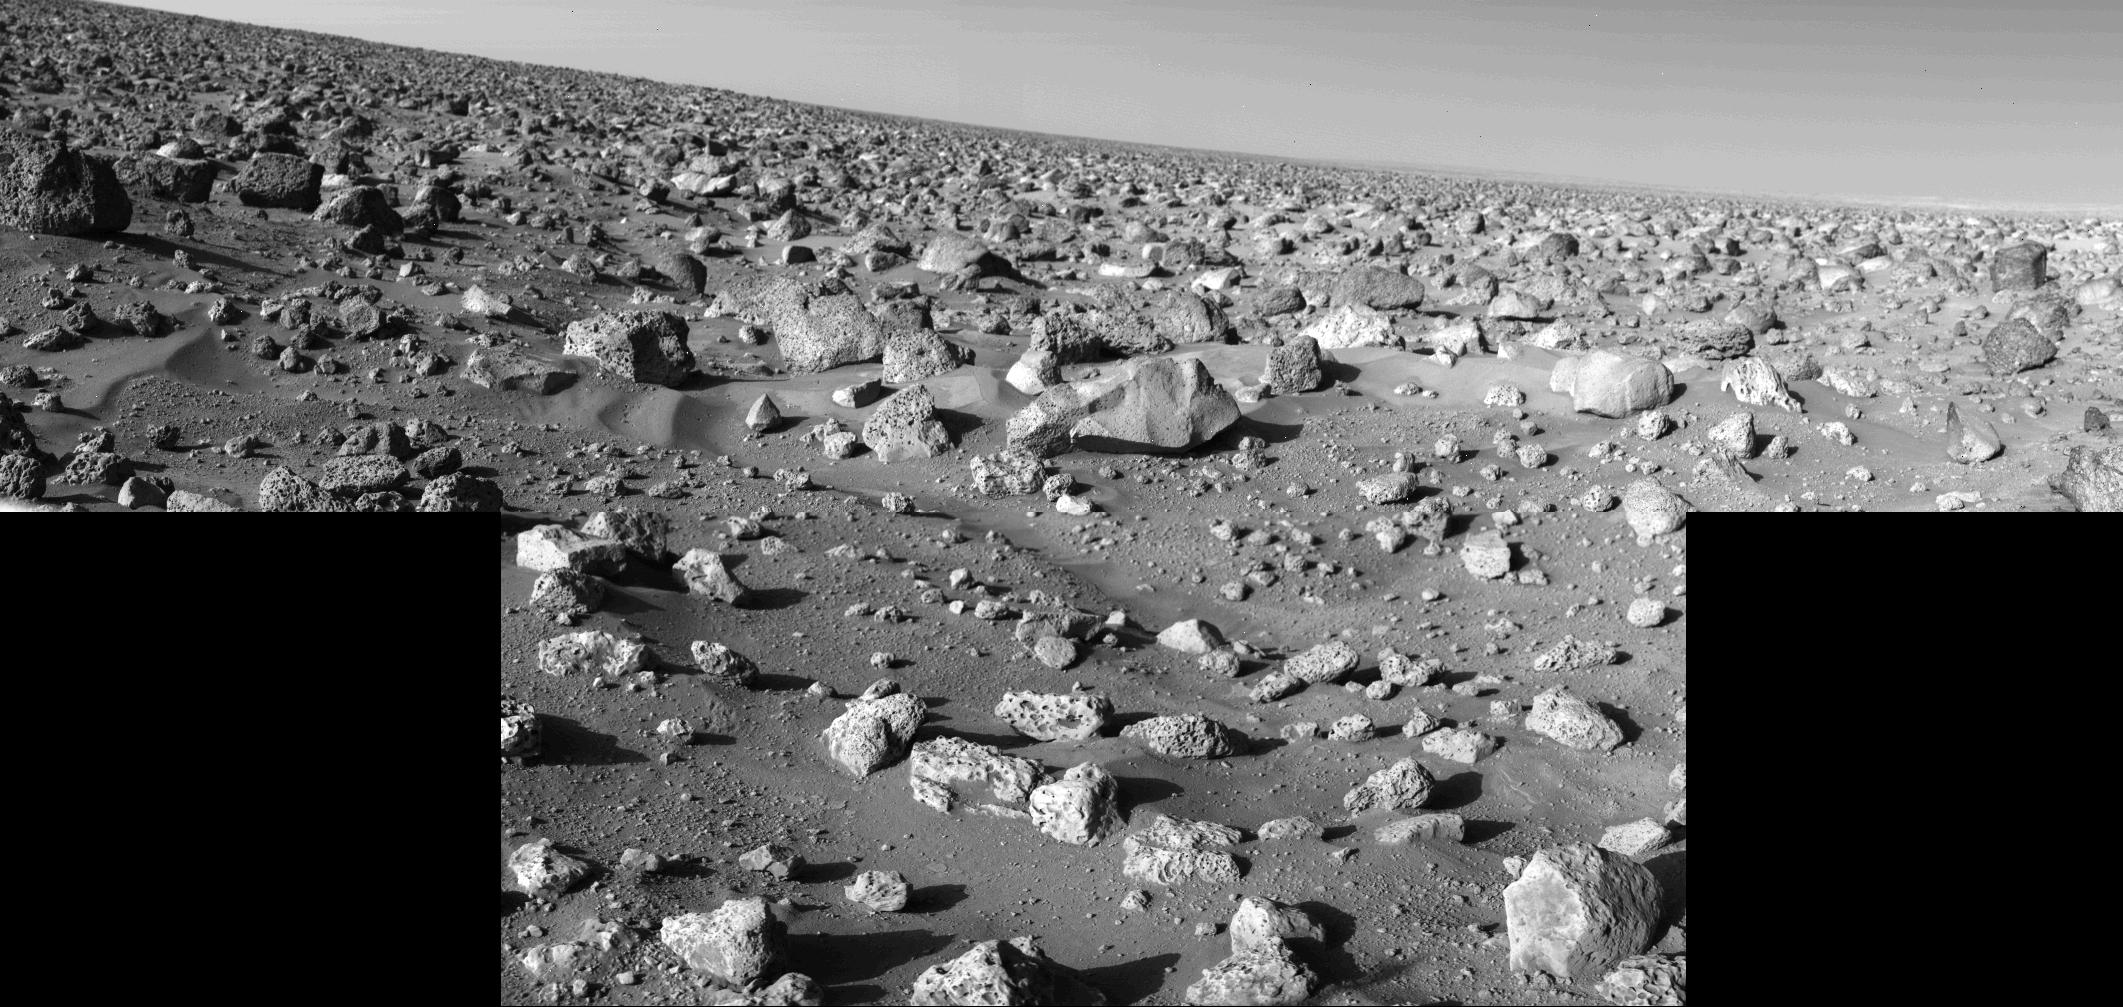 On a clear day on Mars, you can see tens of thousands of rocks.